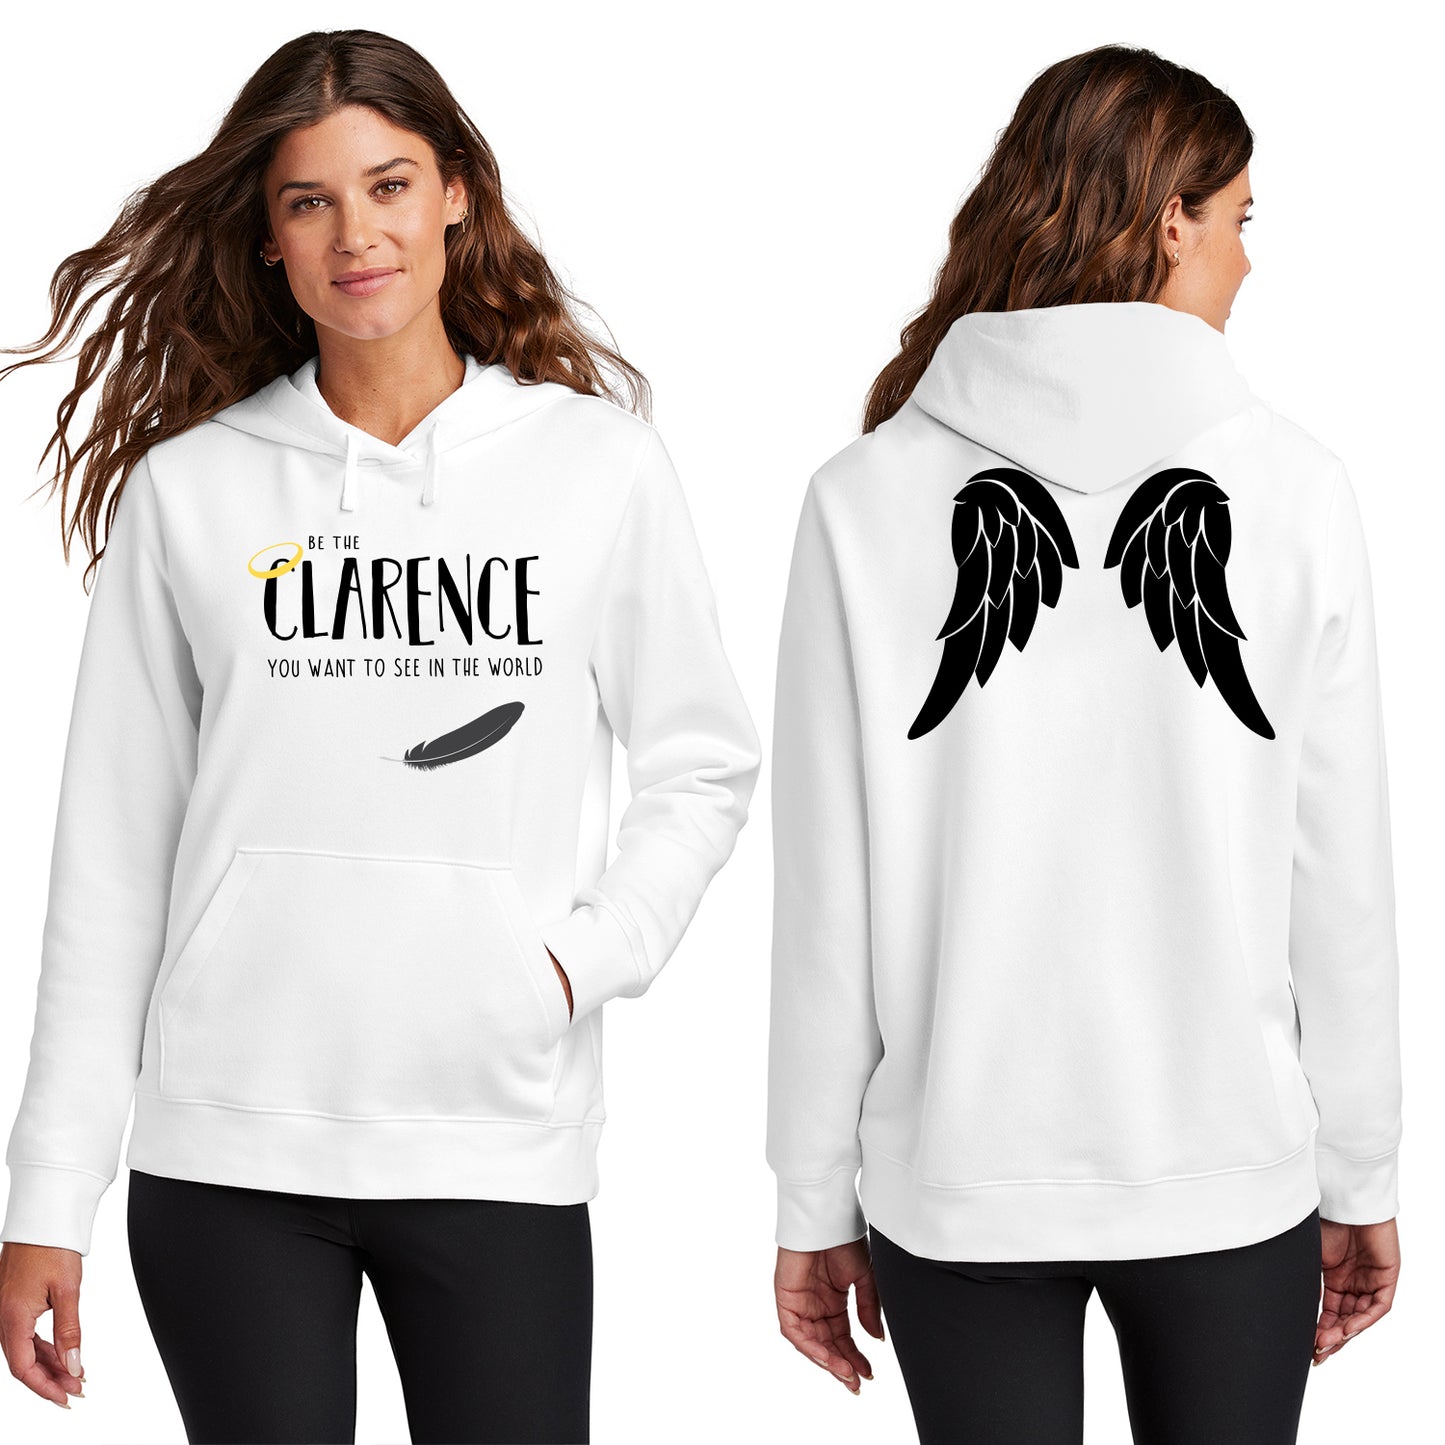 Front and back views of a female model. She's wearing a white hoodie that says "Be the Clarence you want to see in the world" with a halo and black feather on the front, and a black angel wing print on the back.